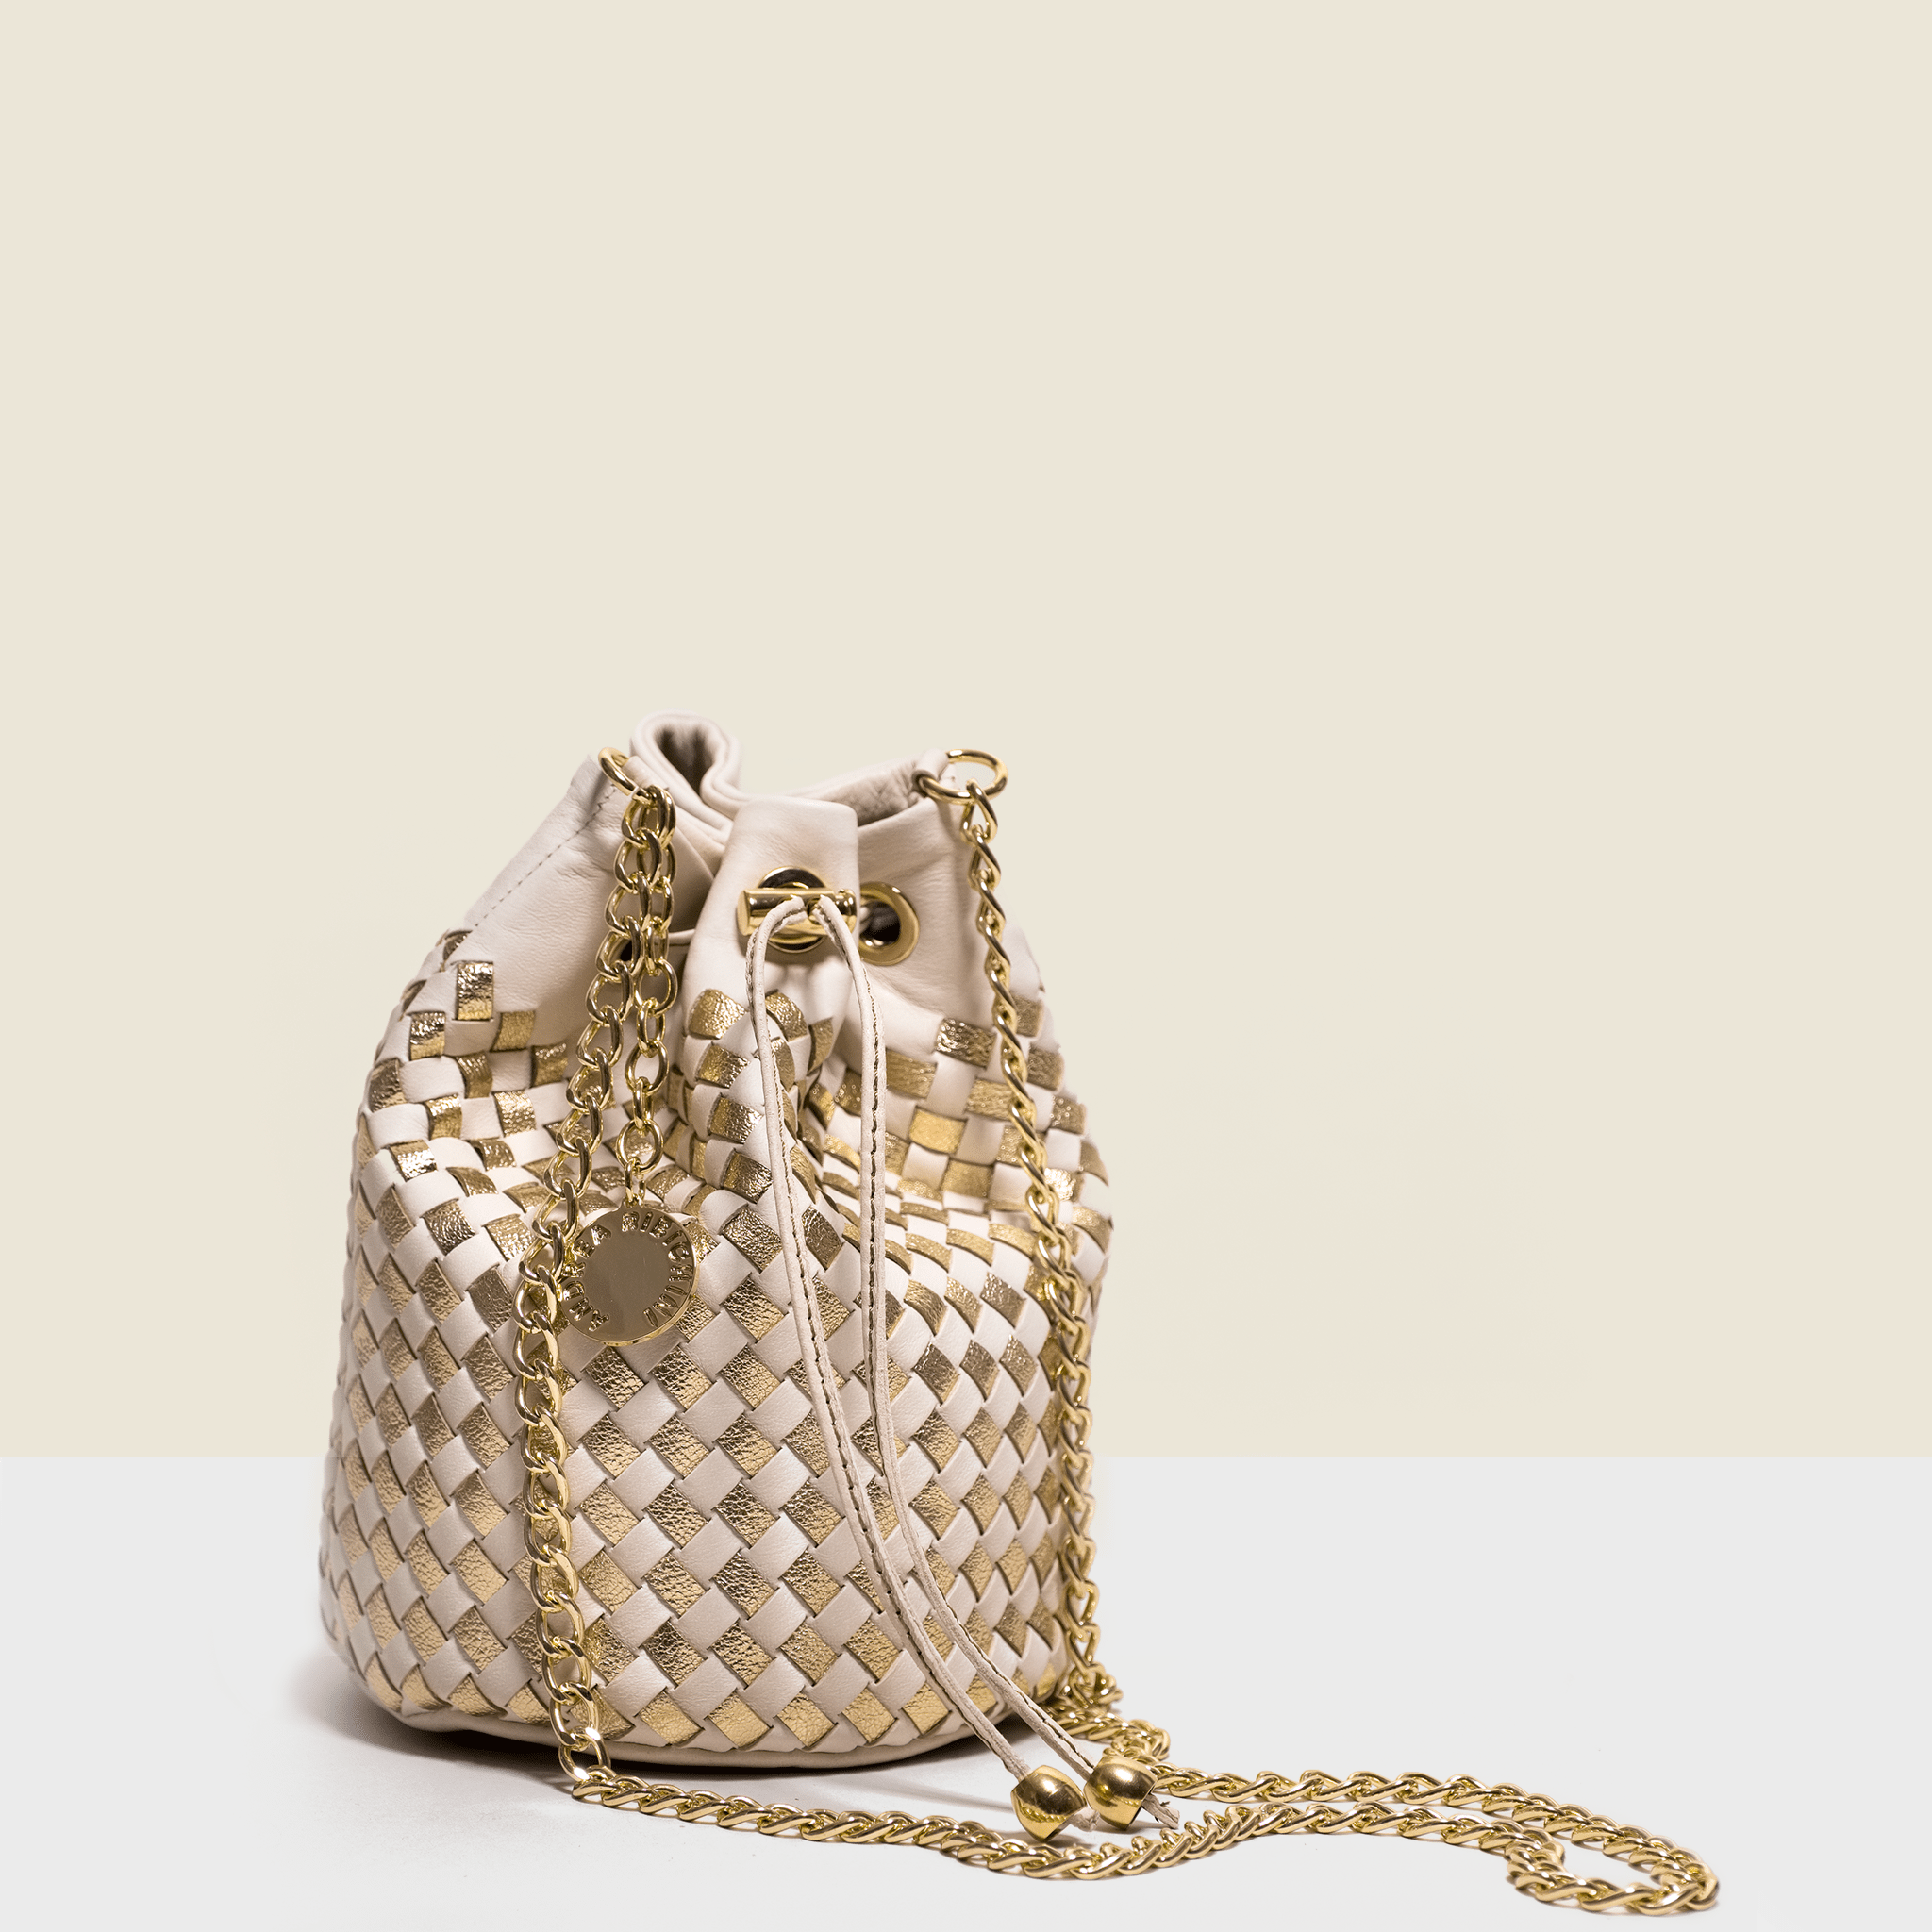 Cream woven leather bag Bucket bag with chain shoulder. Handmade in Italy